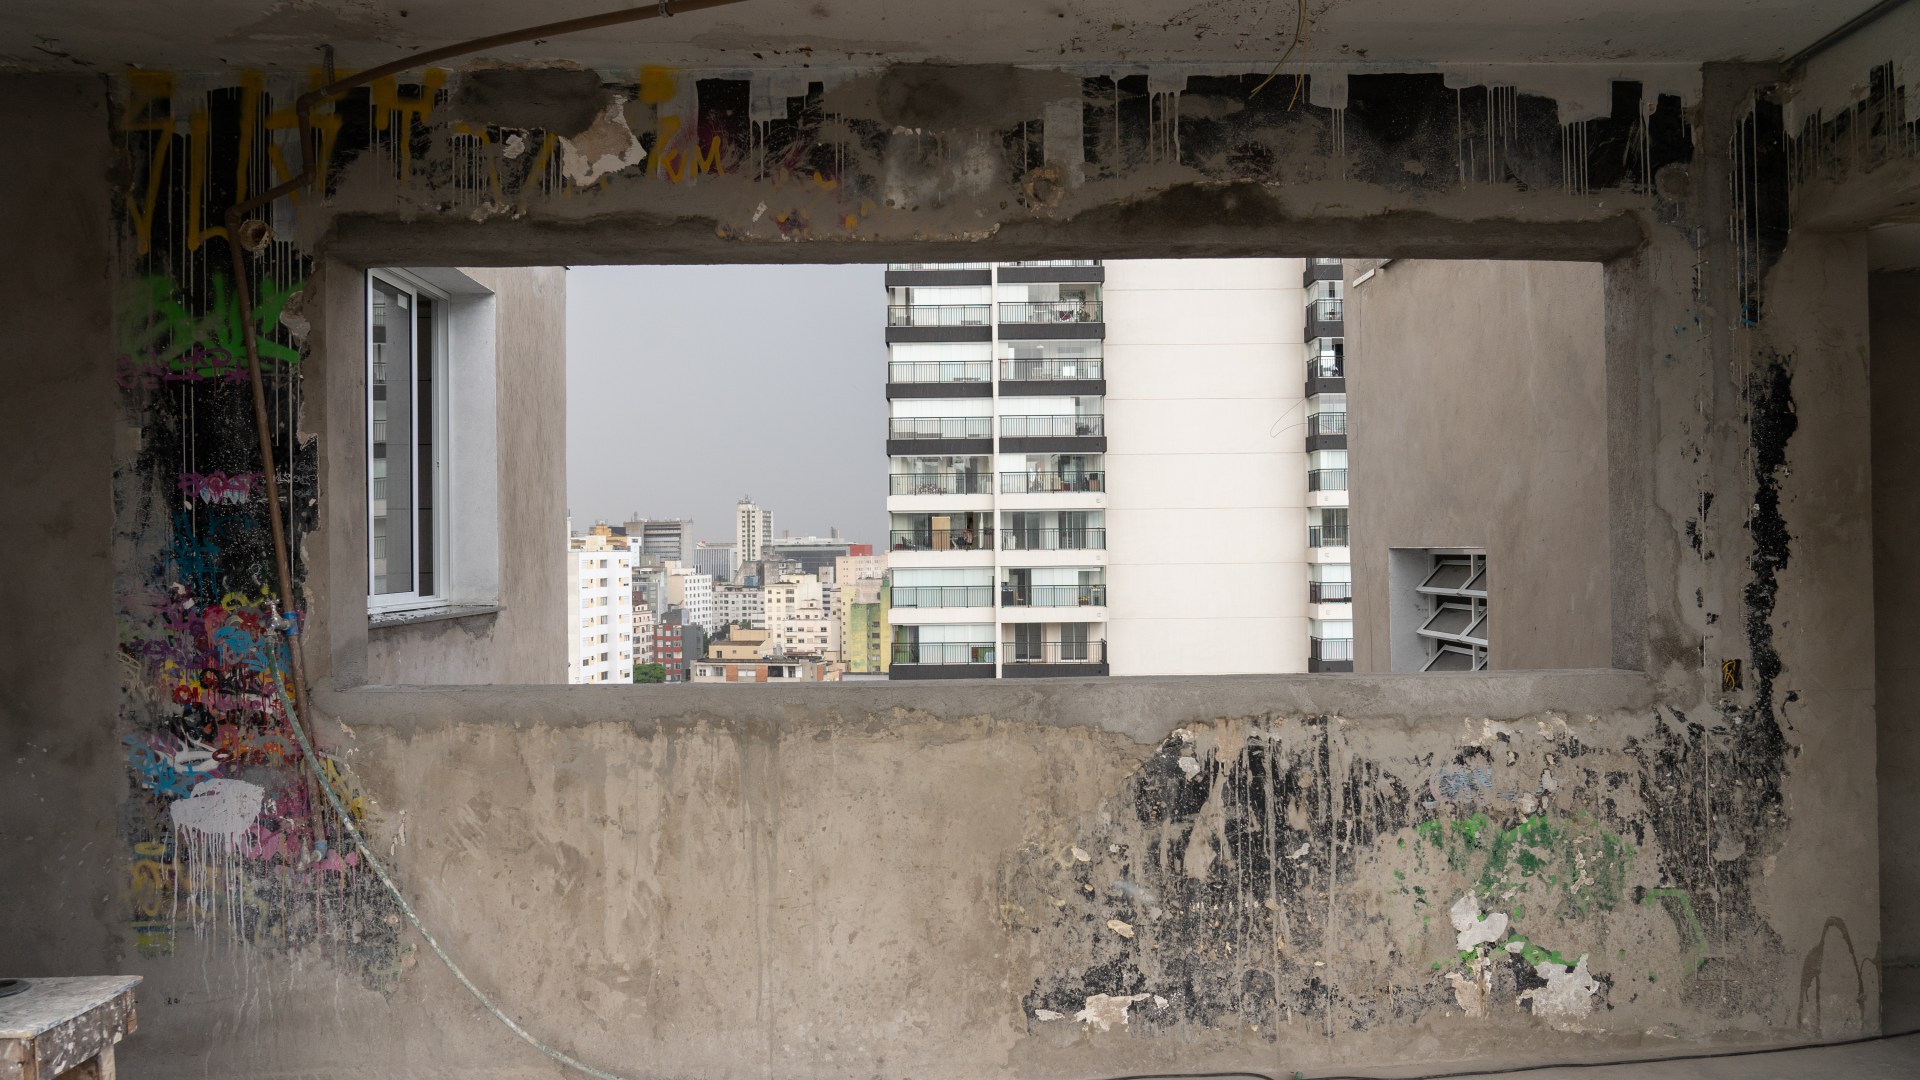 Remnants of graffiti painted during the occupation are seen against the backdrop of the city